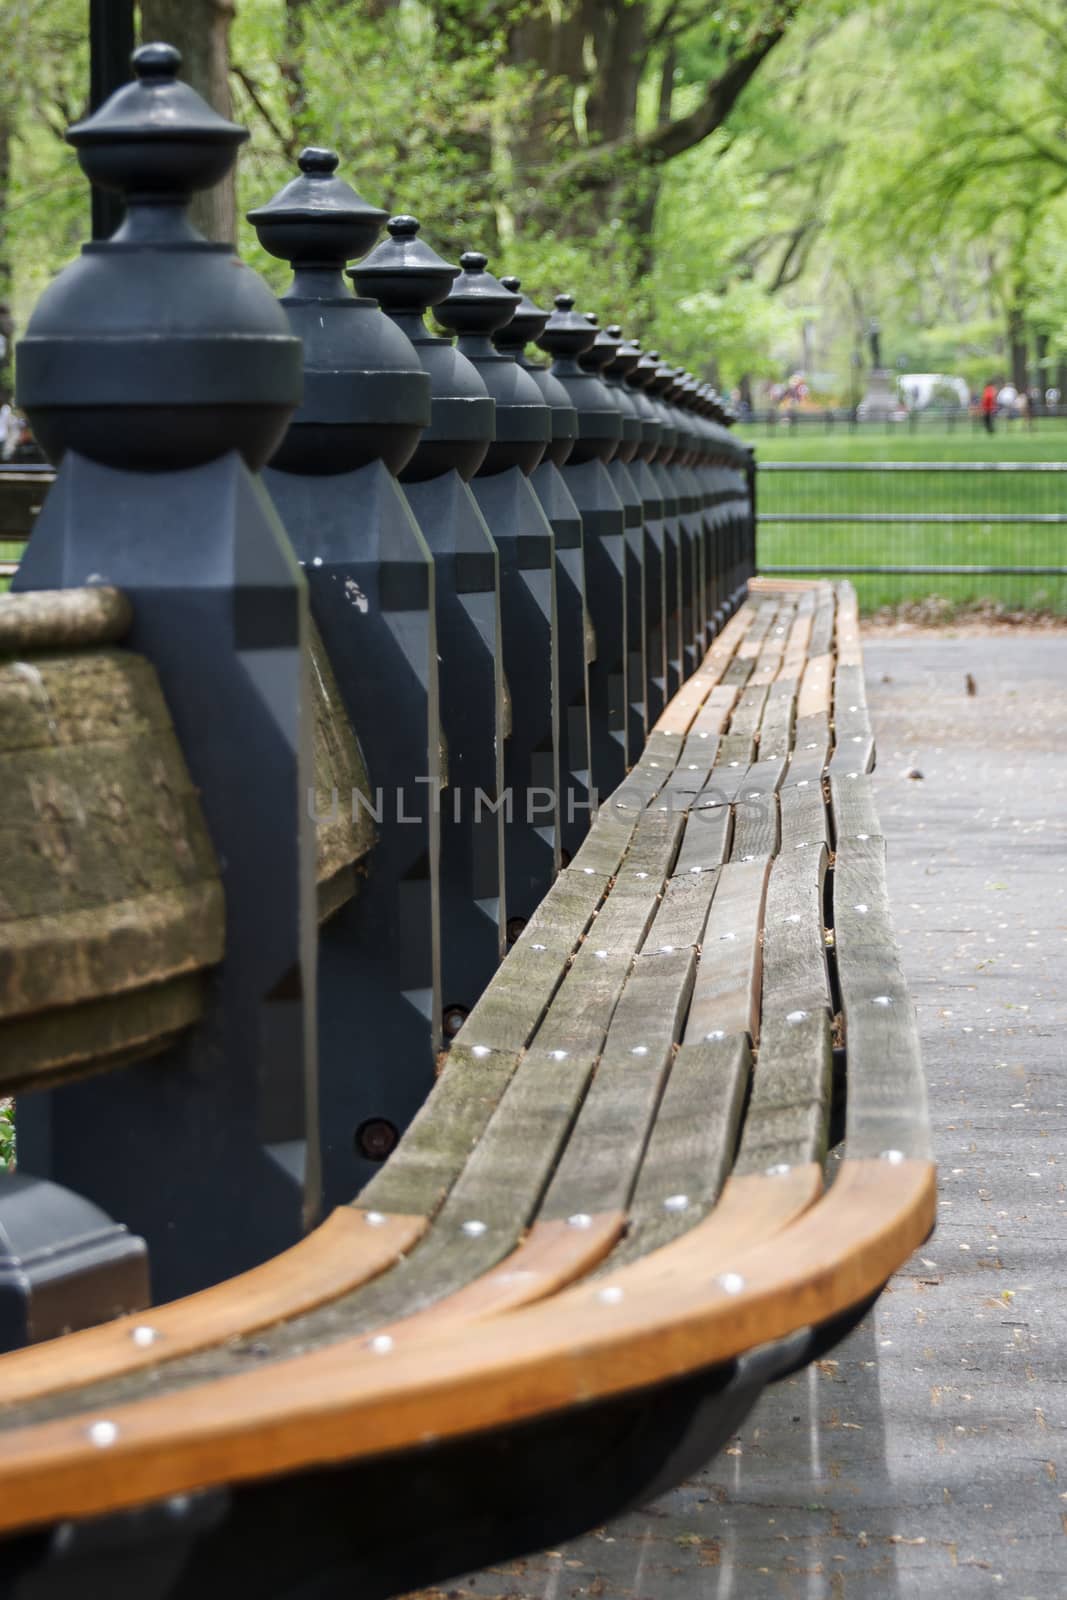 The balusters of a row of park benches